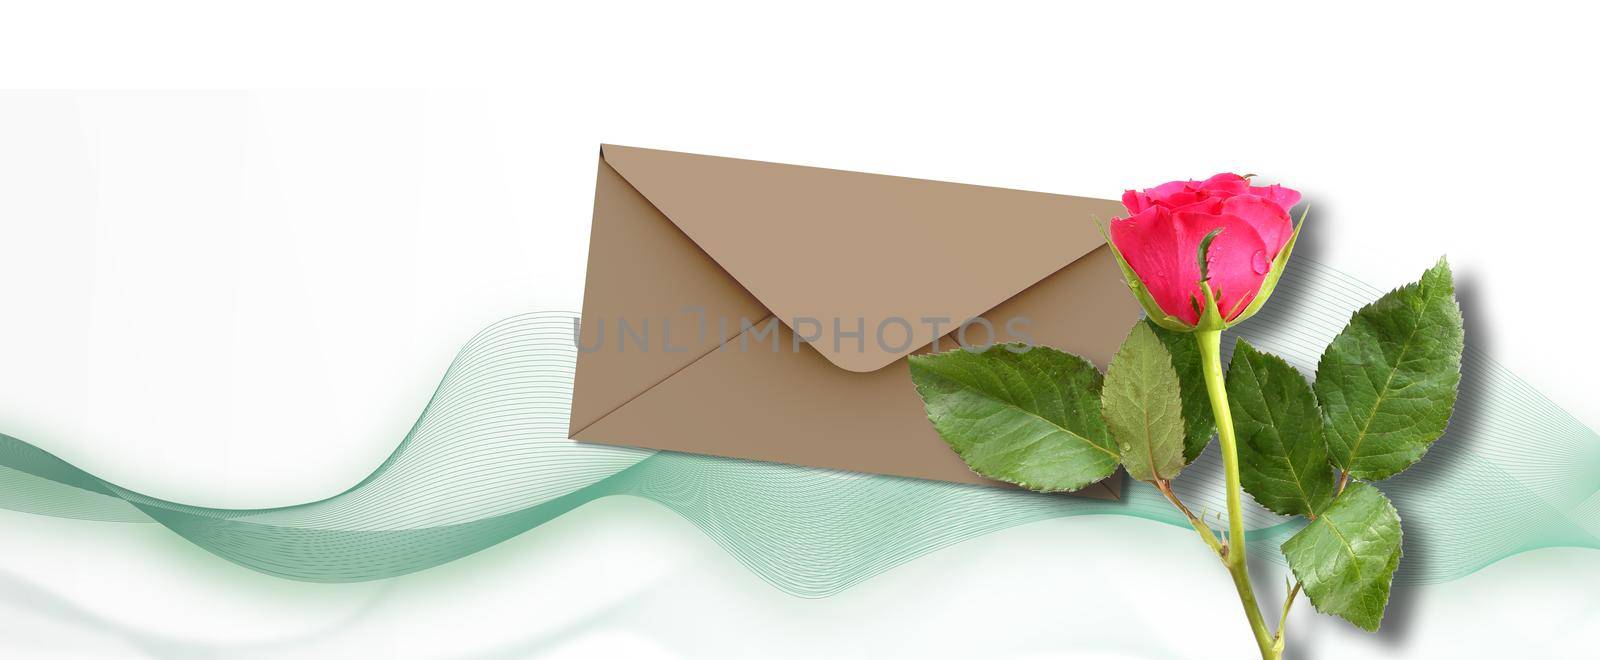 Single Red rose flower on white background with abstract green waves, envelop for mock up. Flowers for holiday cards, mother's day, 8 March, birthday, wedding, Valentine's Day. Top view, flat lay